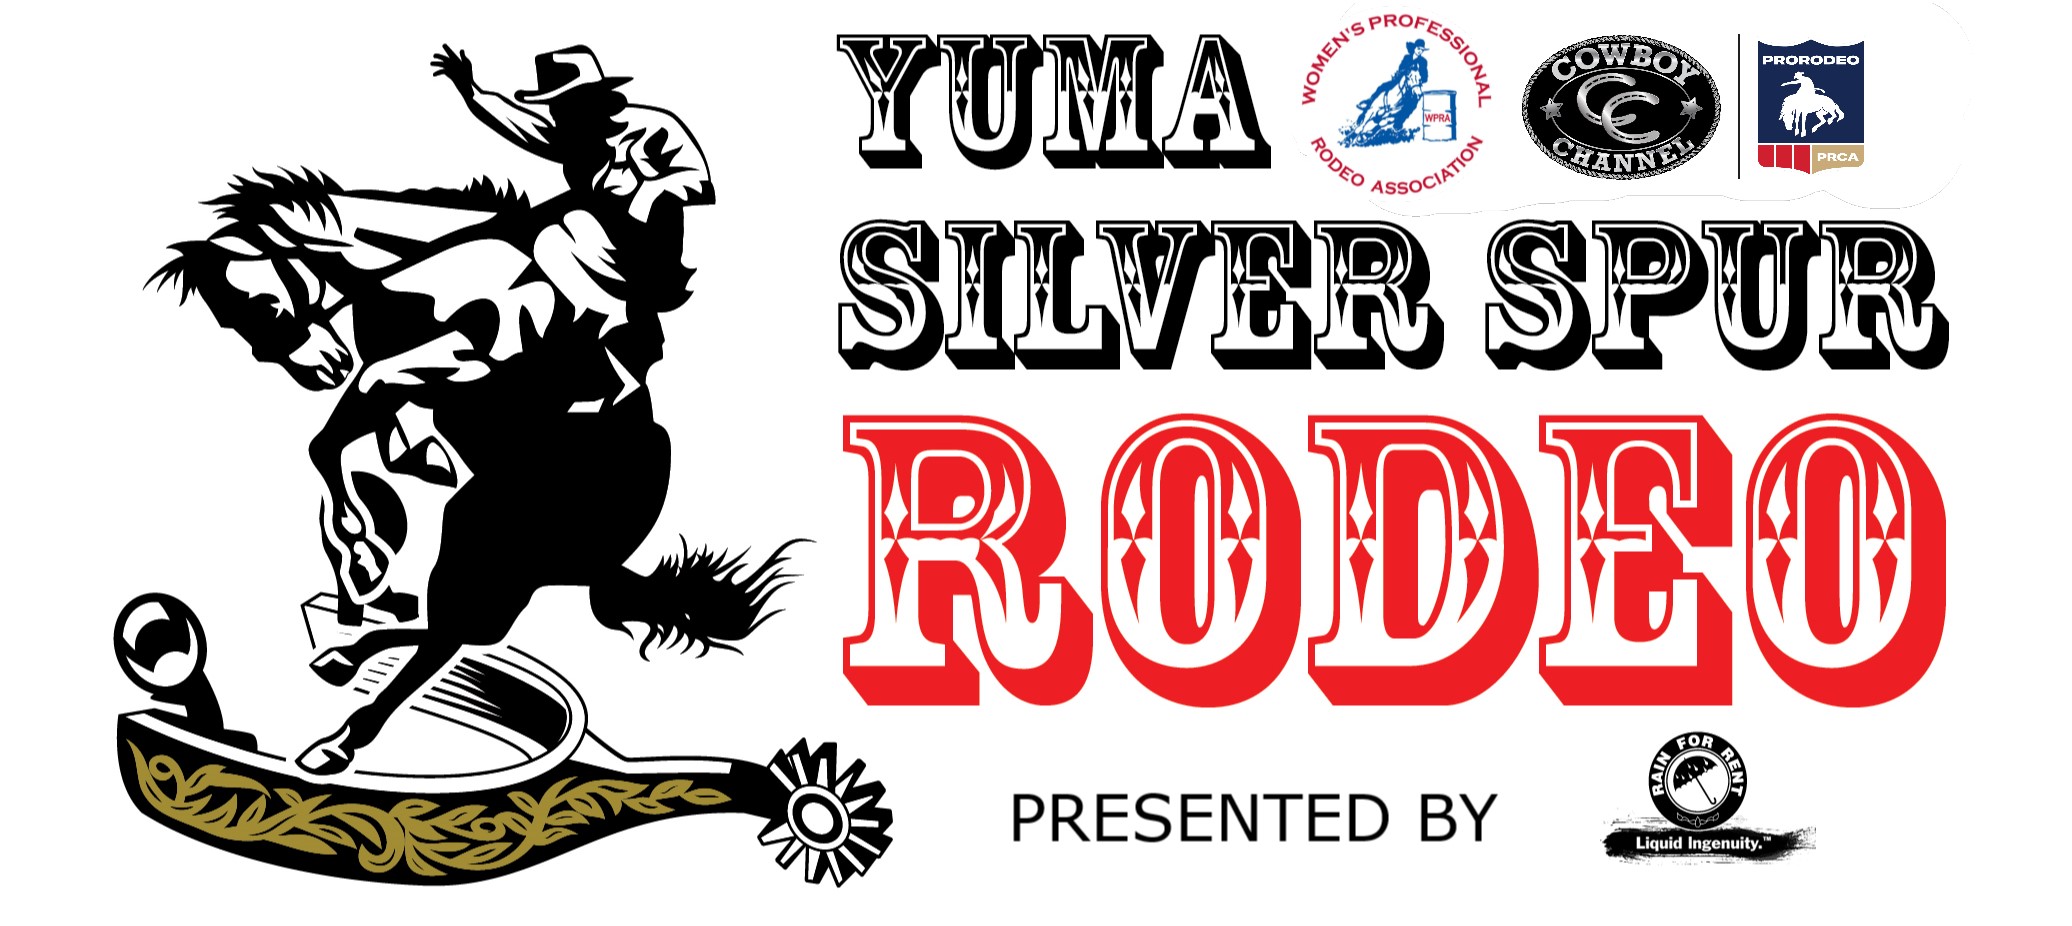 Yuma Silver Spur Rodeo Yuma's Best Professional Sports Event!